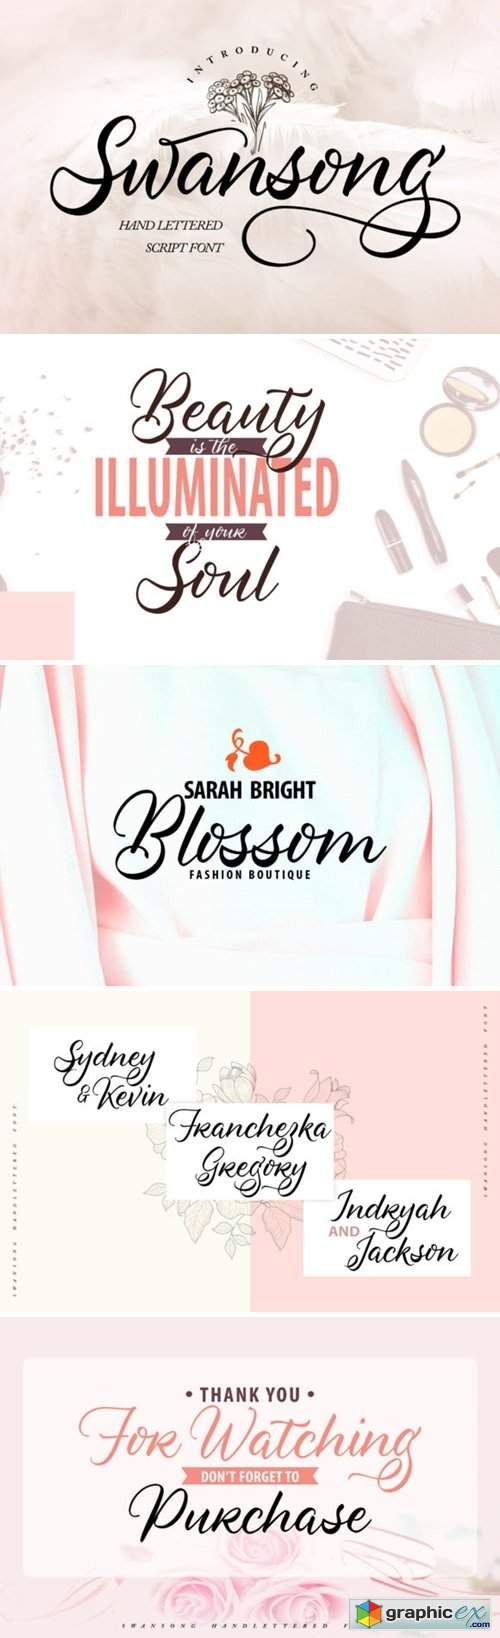  Swansong Font 